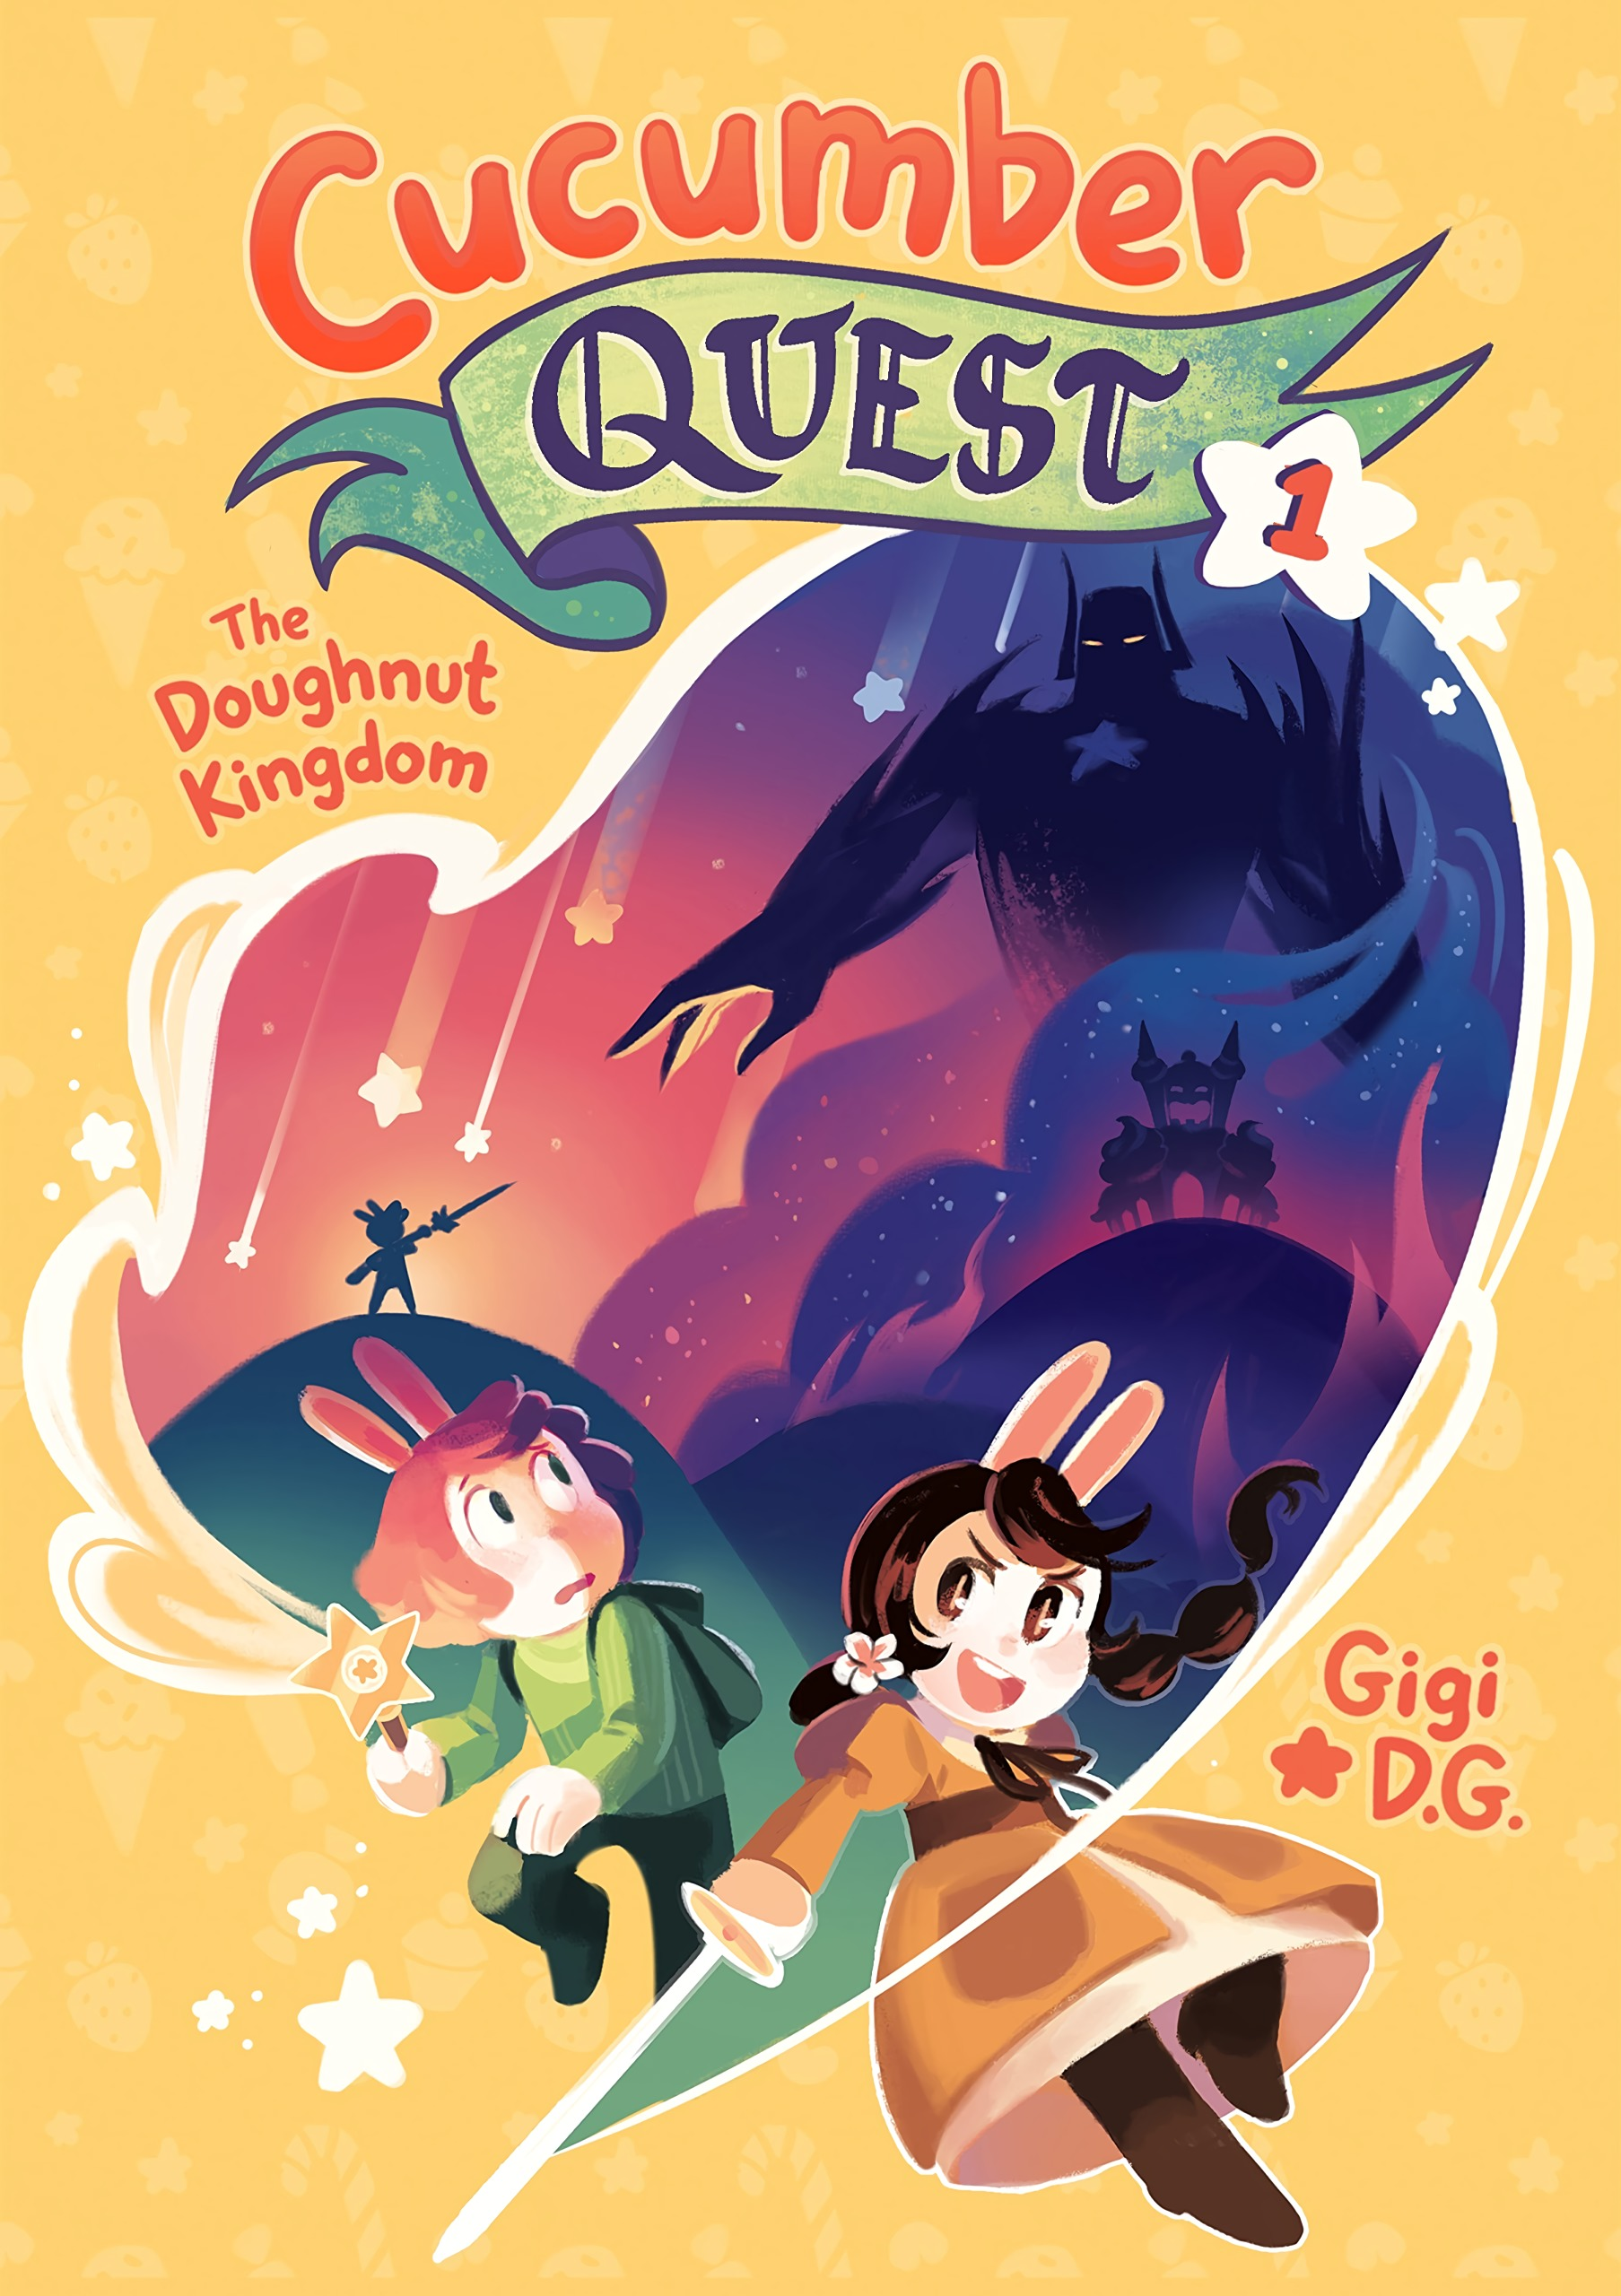 A worried boy with a wand (Cucumber) and a cheerful girl with a sword (Almond) on the cover of Cucumber Quest book 1. The dark Nightmare Knight is shown in the background, standing tall over a burning kingdom.